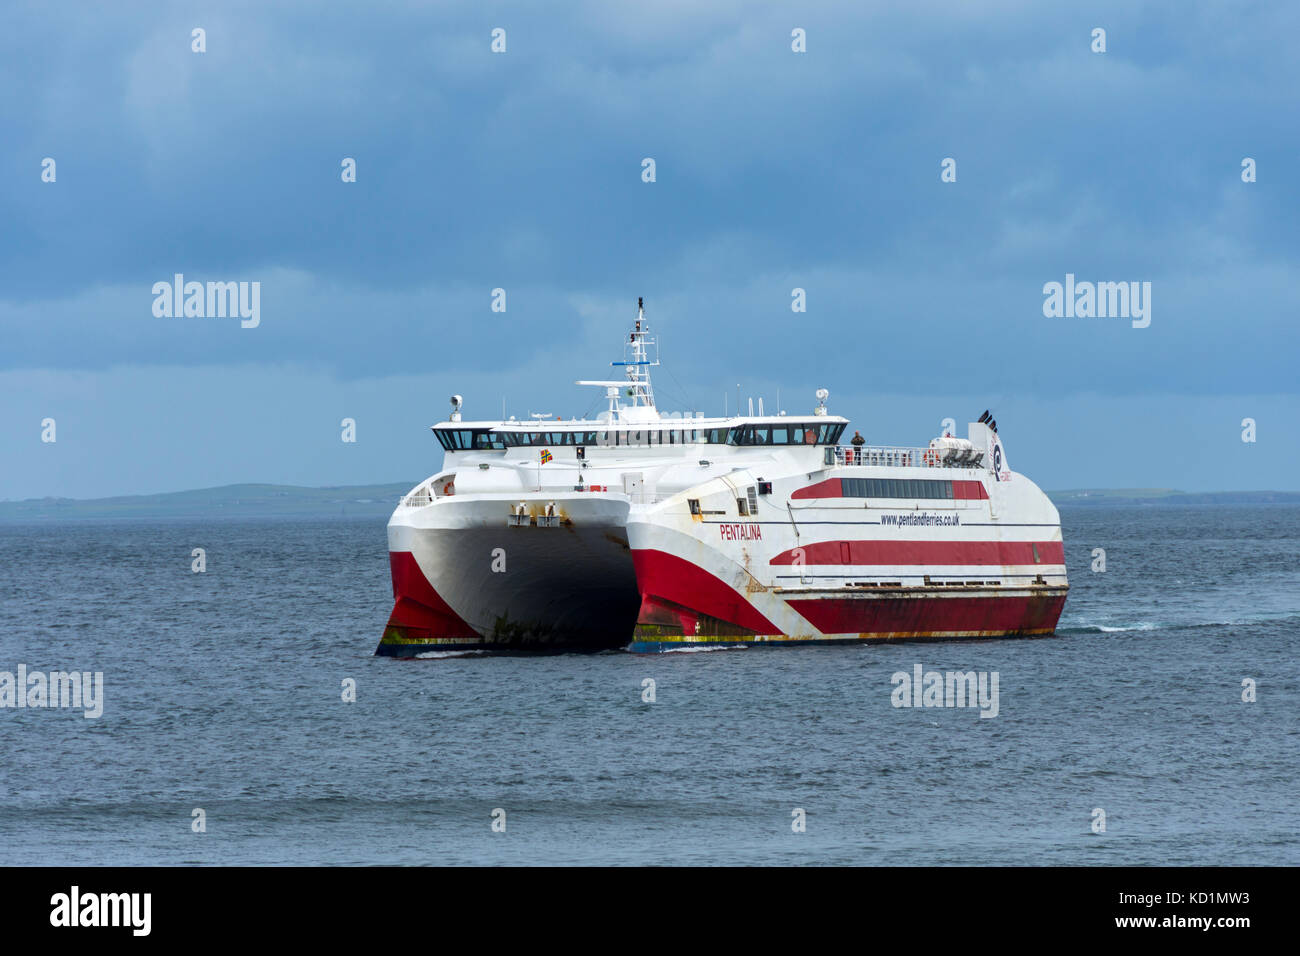 The Caithness to Orkney ferry, the catamaran 'MV Pentalina' of Pentland Ferries, approaching Gills Bay, Caithness, Scotland, UK Stock Photo